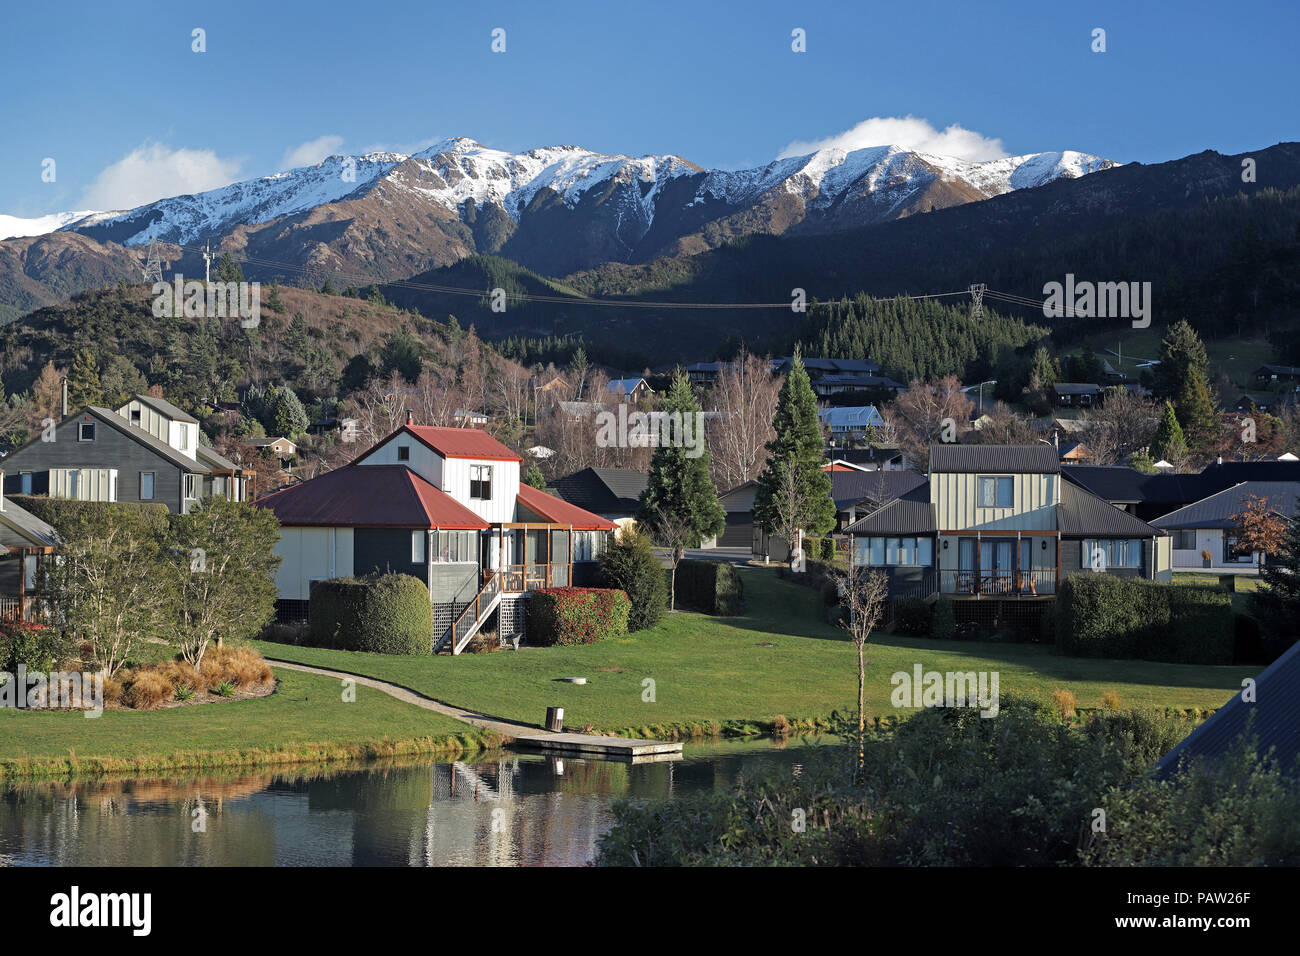 Picture by Tim Cuff - 17 July 2018 - Travel feature on the thermal spa resort of Hanmer Springs, Hurunui District, New Zealand: view from the Village  Stock Photo